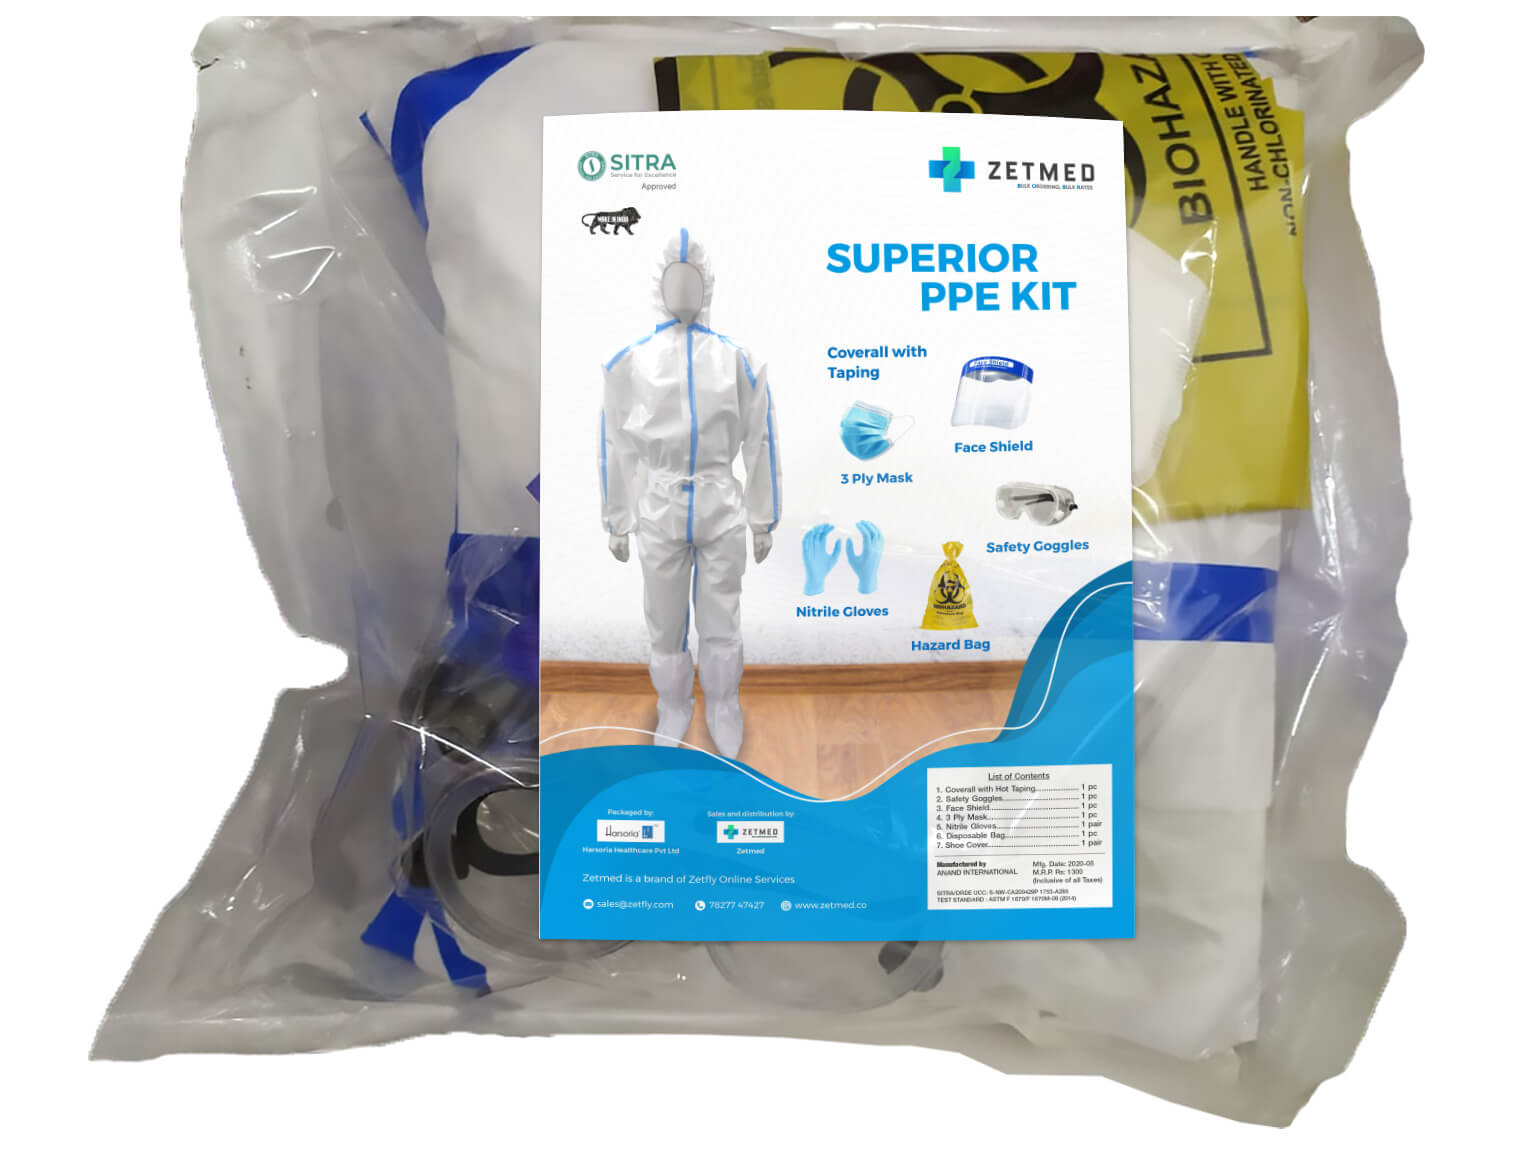 Superior PPE Kit - Coverall + Gloves + 3 Ply Mask + Face Shield + 